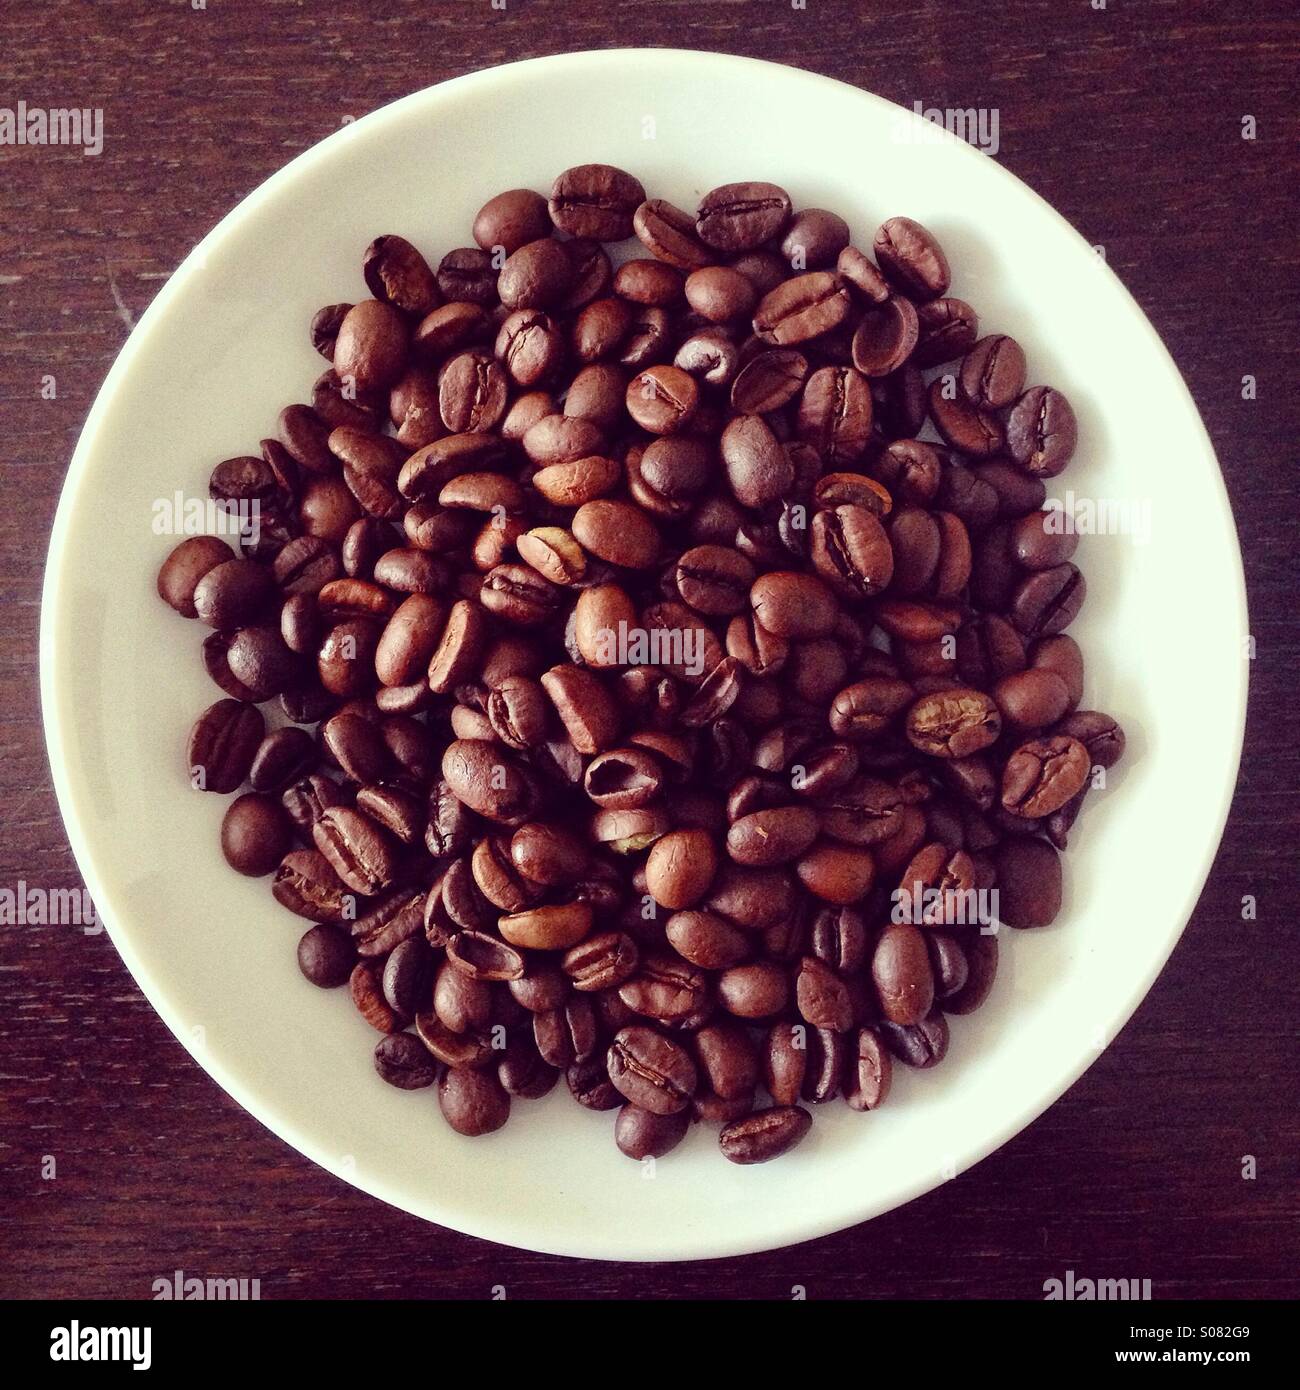 Roasted coffee beans on plate Stock Photo